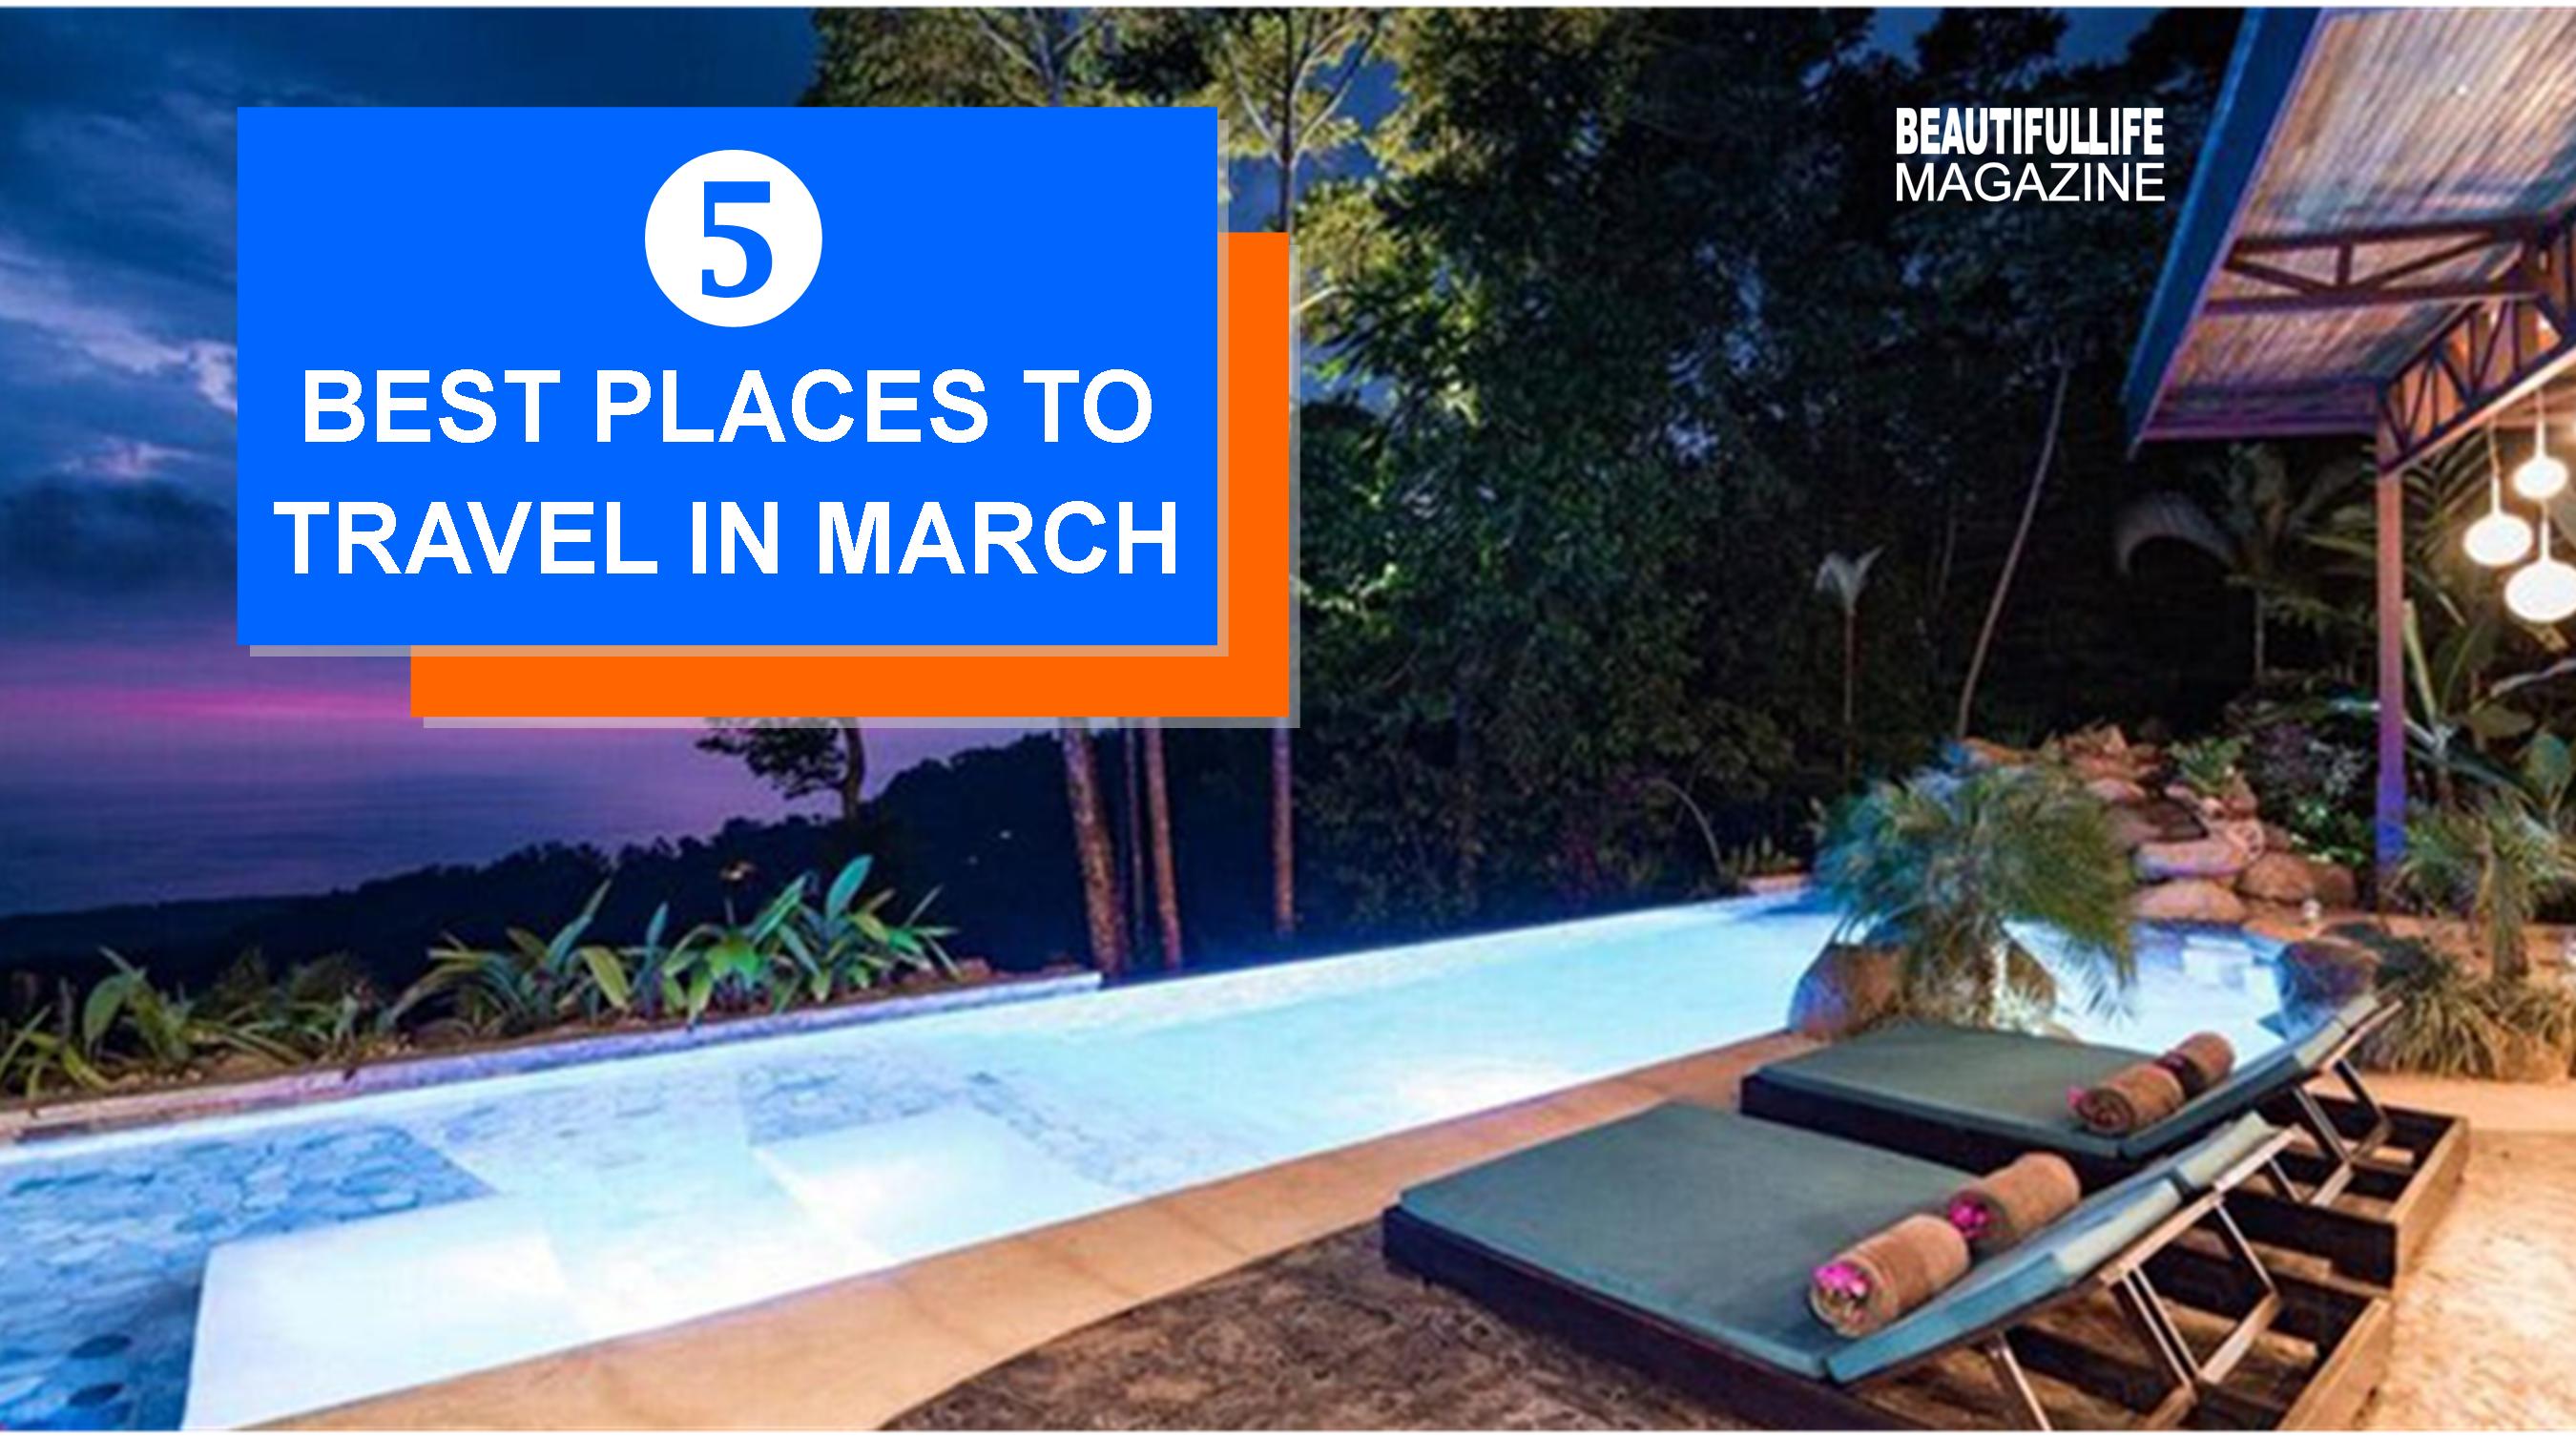 March is actually packs lots of travel opportunities for skiers, romantics and anyone looking to get a little much-needed vitamin D. Behold, the five best places to travel in March, even if it means you’ll probably be flying out during a snowstorm.